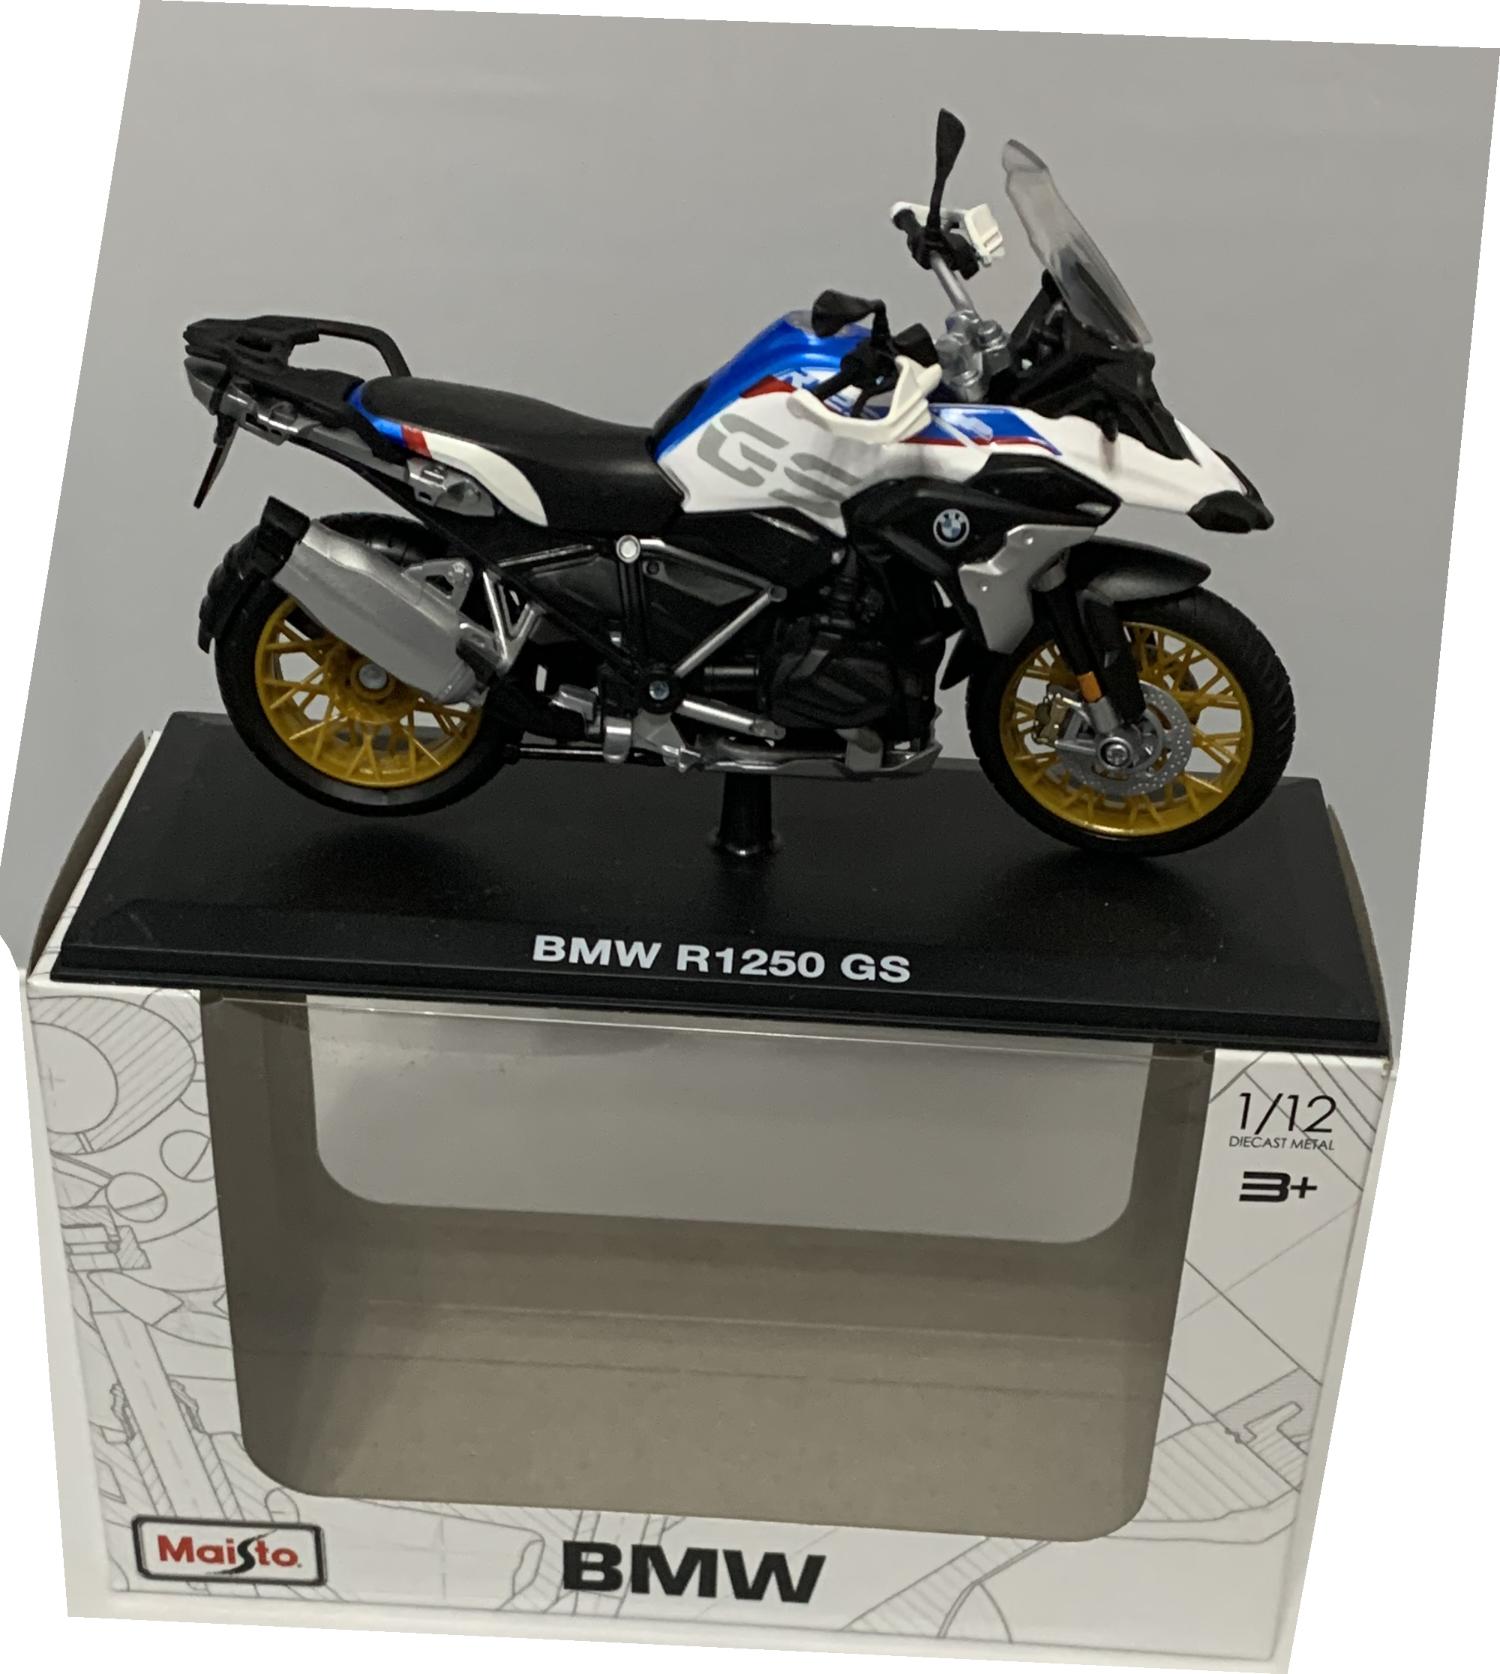 Scale: 1:12 Diecast Metal with Plastic Parts (approx length 18  cm), Model is mounted on a removable plinth and is presented in a window display box